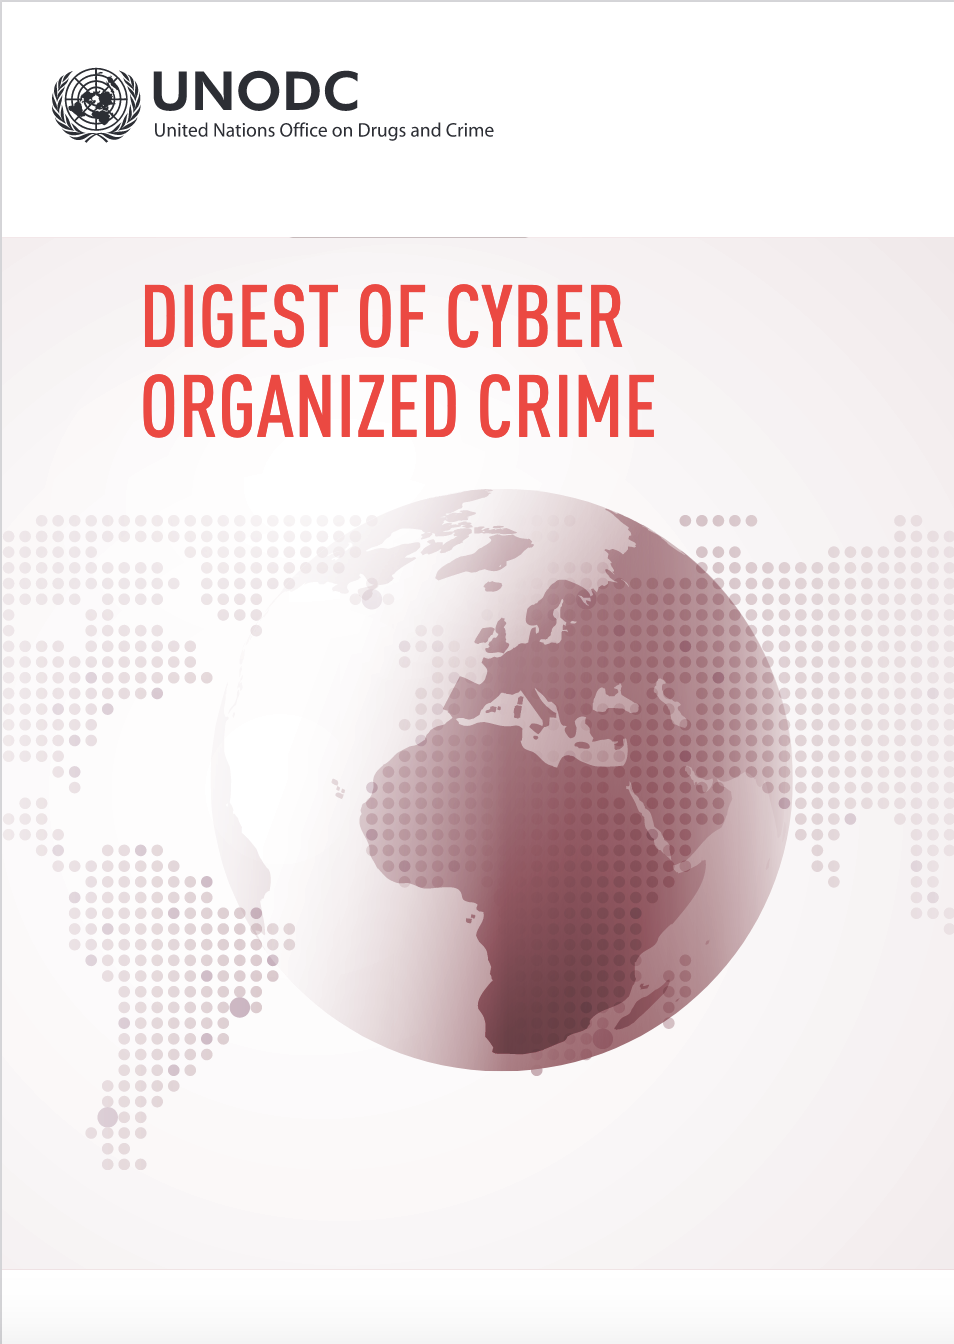 <div style="text-align:center"> </div>
<div style="text-align:center"><a href="https://sherloc.unodc.org/cld/en/st/resources/publications/Digest-of-Cyber-Organized-Crime">Digest of Cyber Organized Crime</a></div>